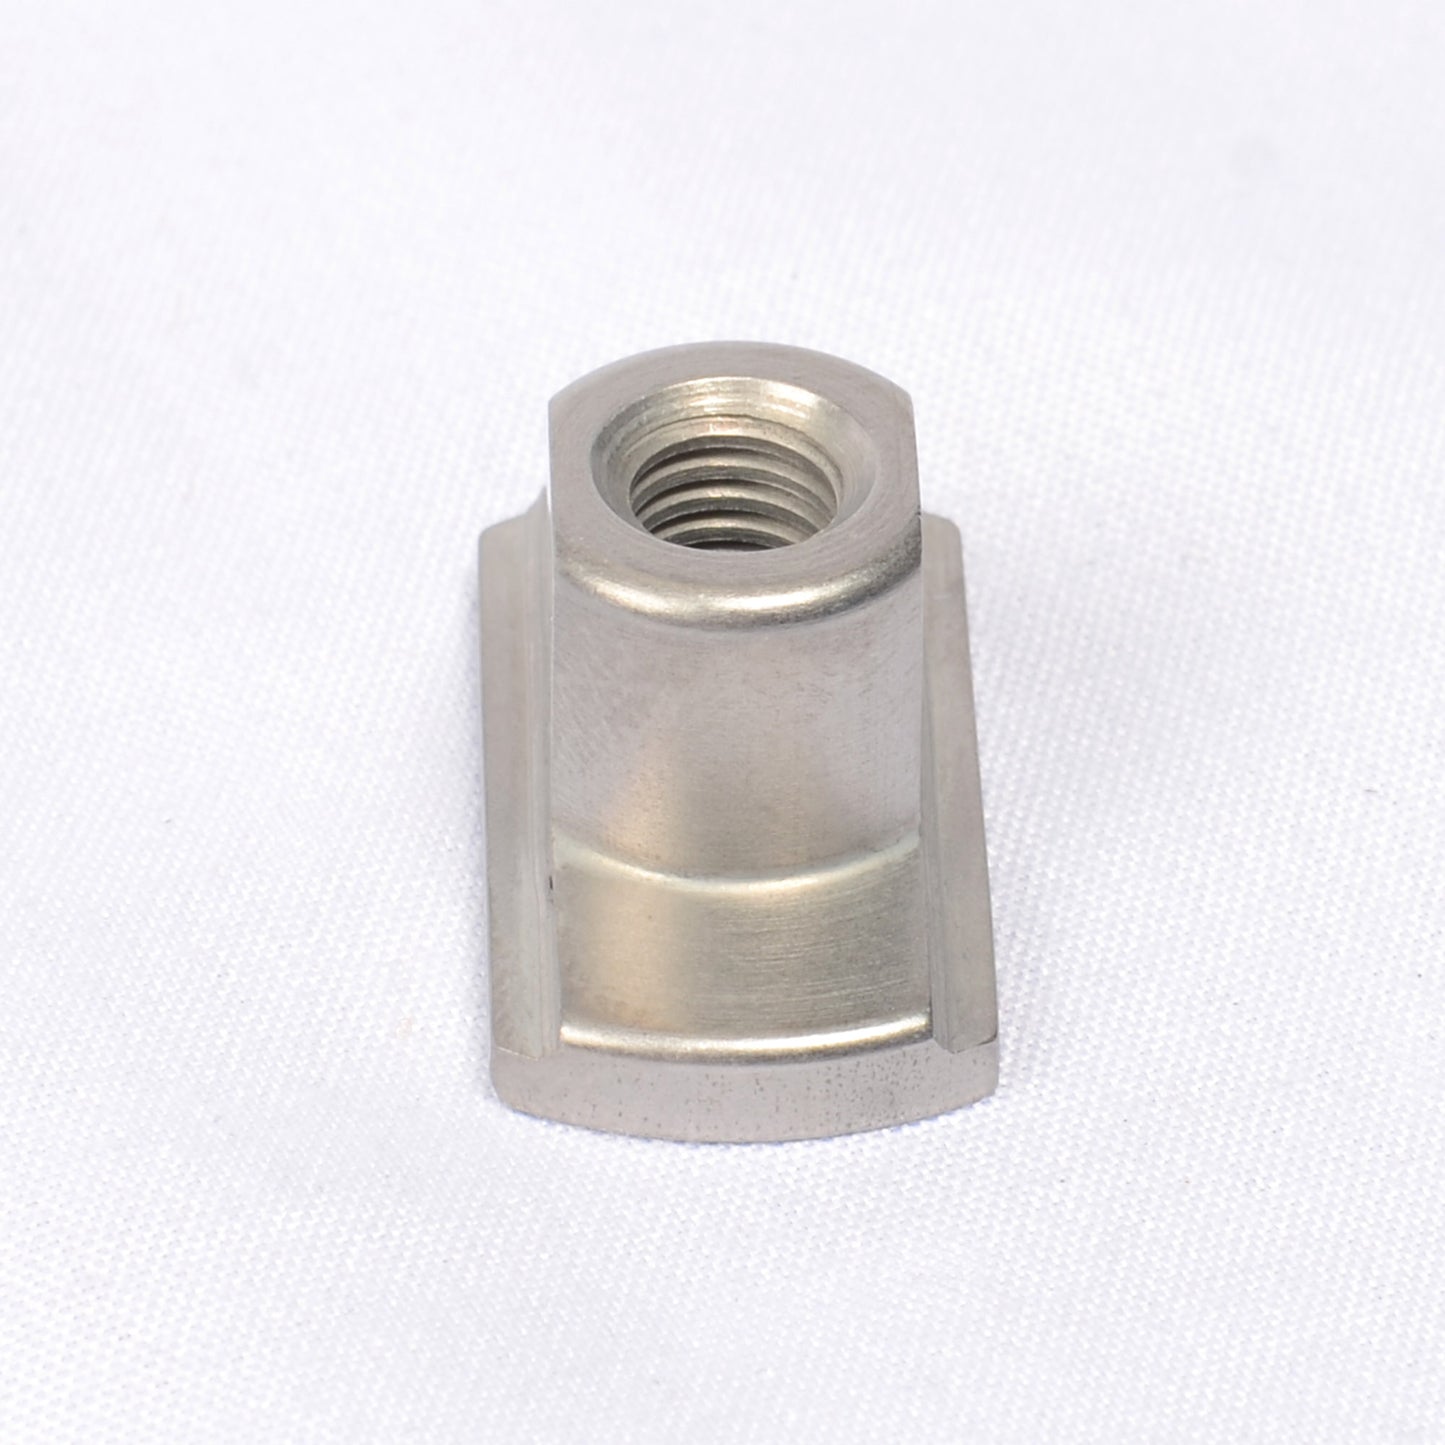 M6-T-Nut Accessory rail fitting. Stainless steel.